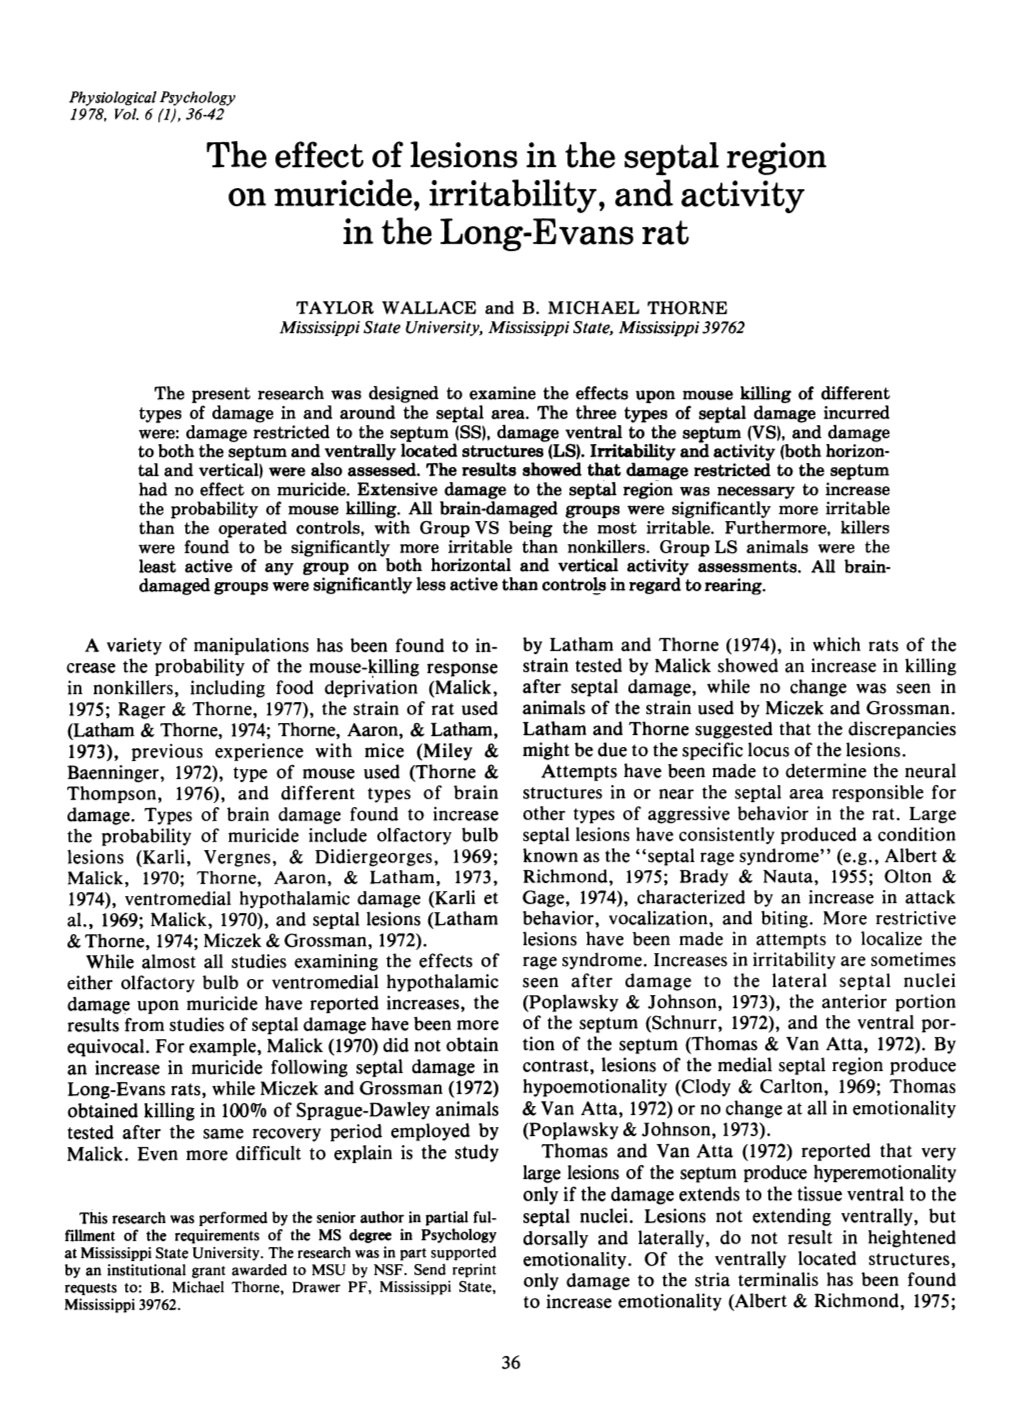 The Effect of Lesions in the Septal Region on Muricide, Irritability, and Activity in the Long-Evans Rat